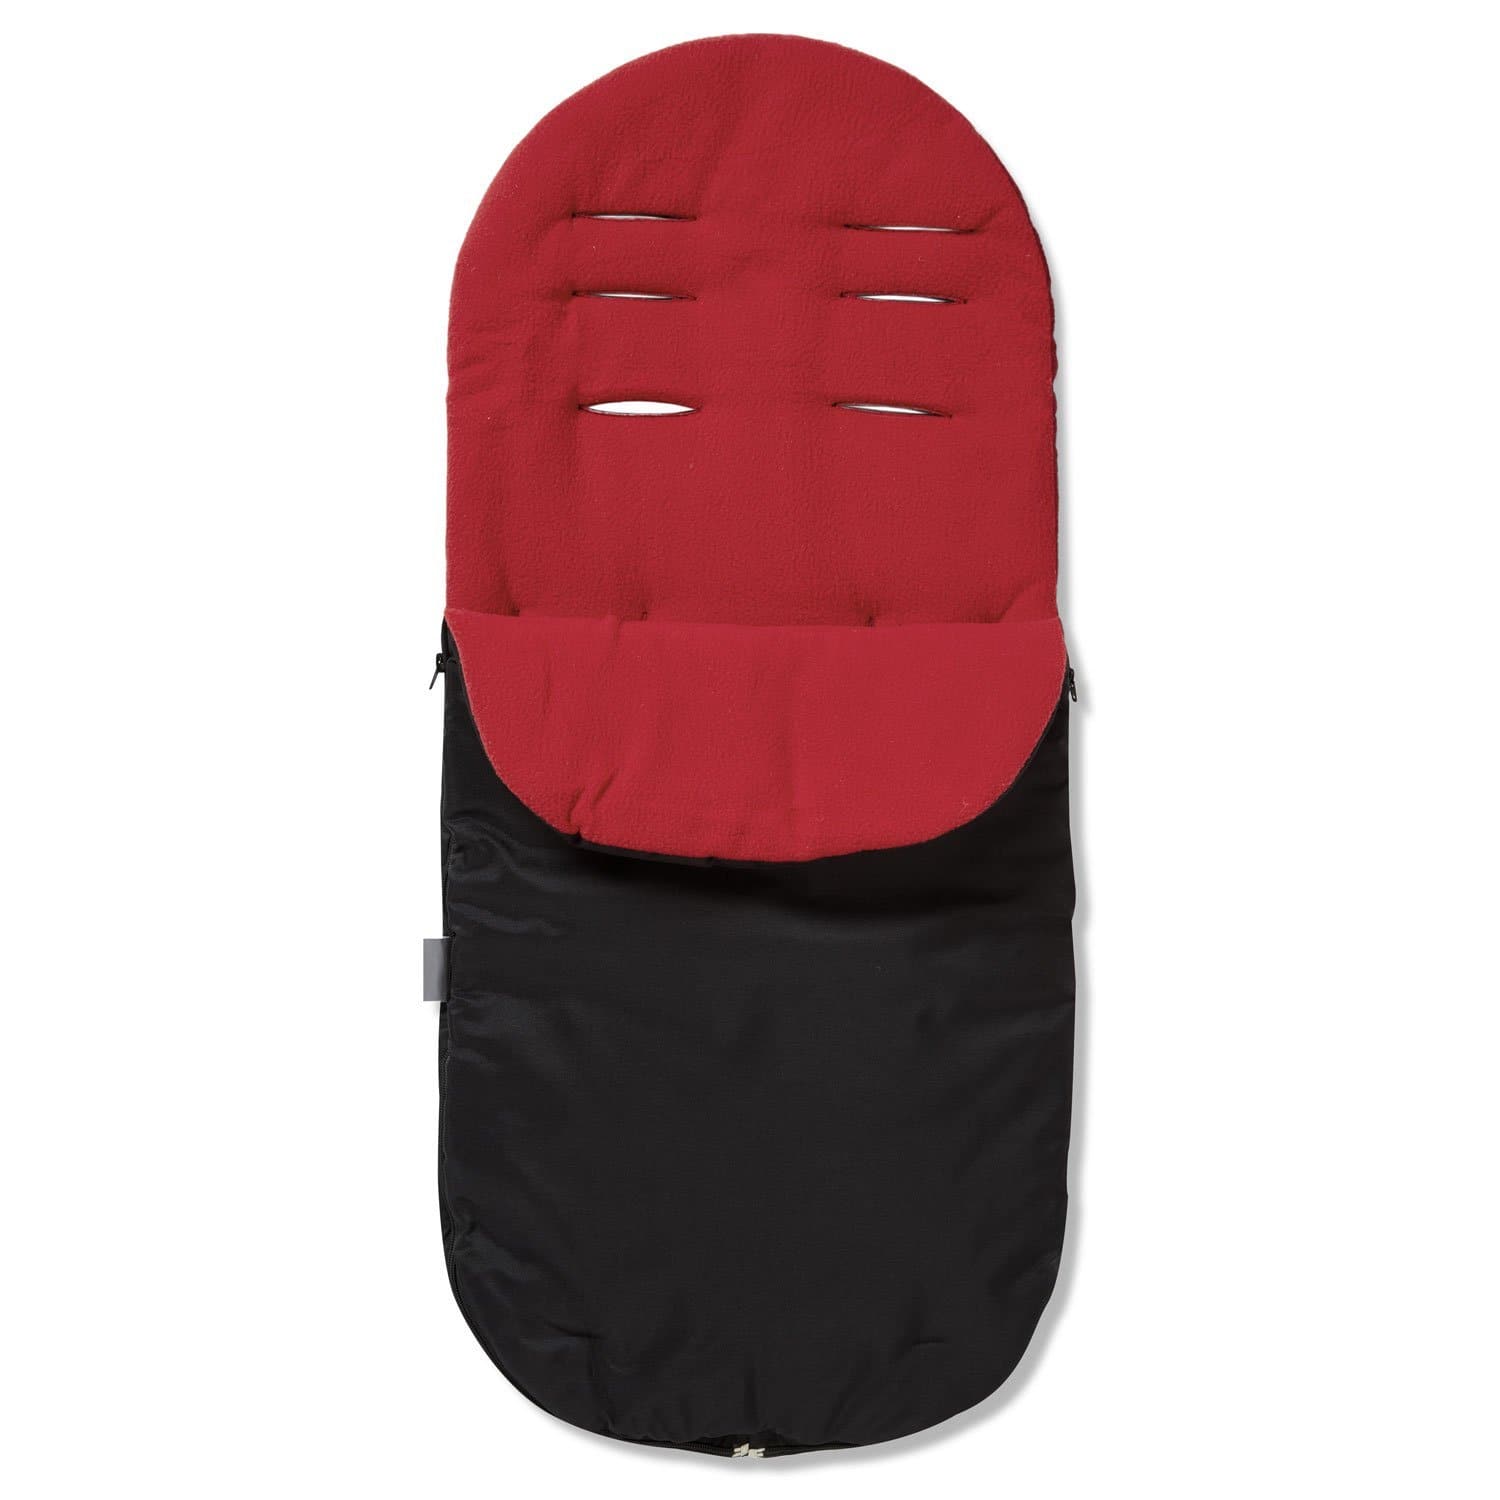 Footmuff / Cosy Toes Compatible with Joie - Red / Fits All Models | For Your Little One